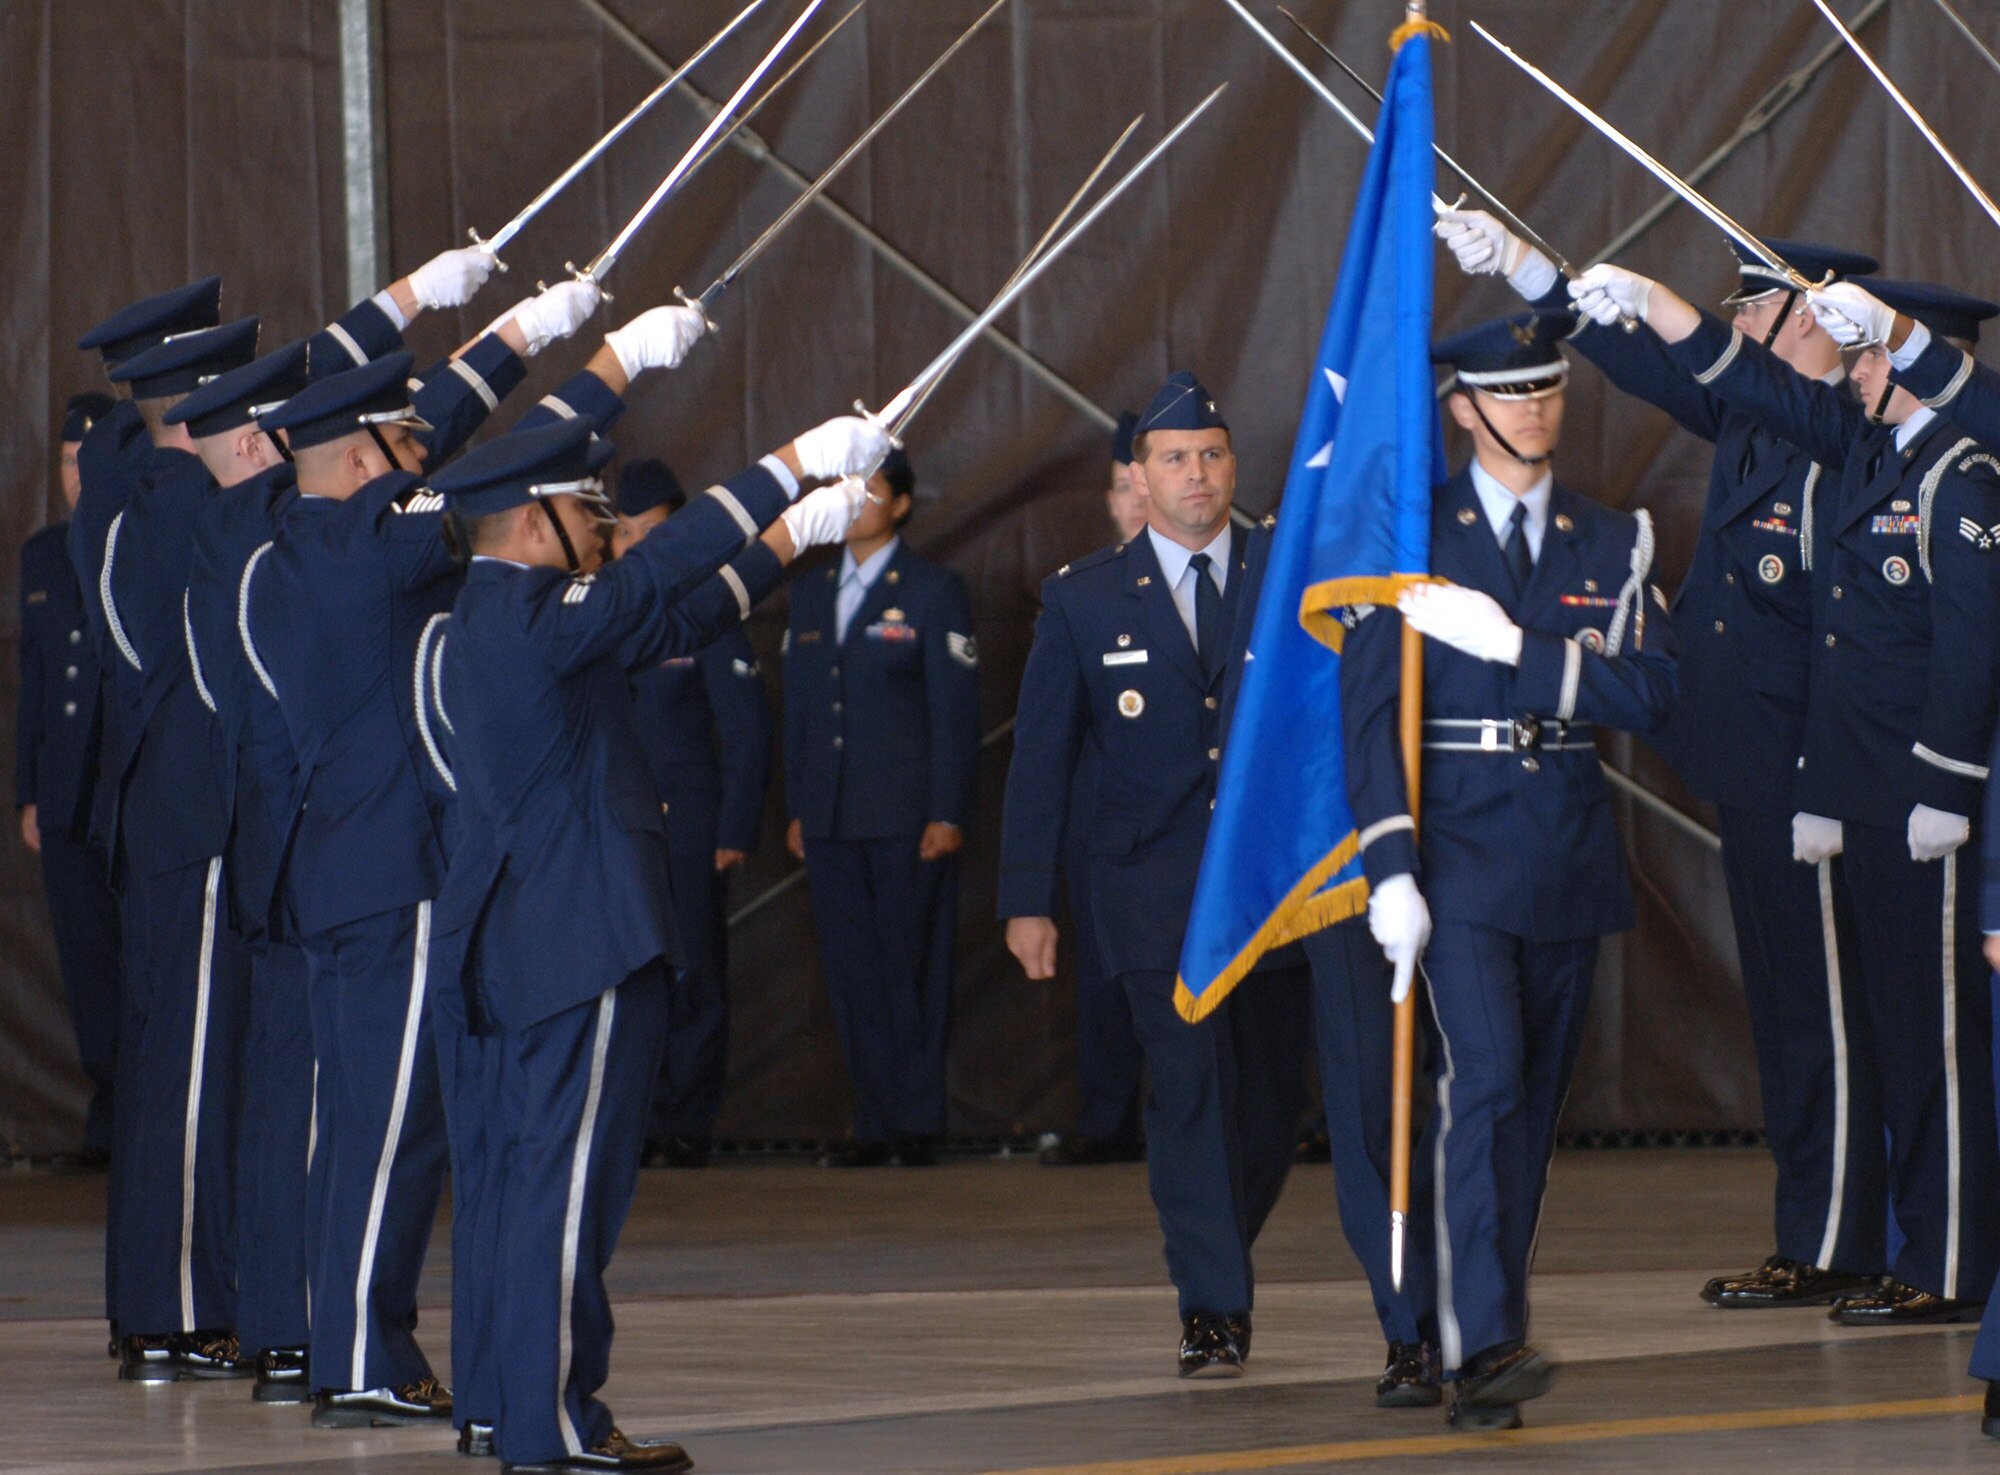 FAIRCHILD AIR FORCE BASE, Wash. – Col. Thomas Sharpy (center, behind flag), 92nd Air Refueling Wing commander, walks through a sword cordon made up of Fairchild Honor Guard members during his assumption of command ceremony here May 22. Colonel Sharpy comes to Fairchild from Travis Air Force Base, Calif., where he served as the 60th Air Mobility Wing vice commander. (U.S. Air Force photo/Senior Airman Chad Watkins)